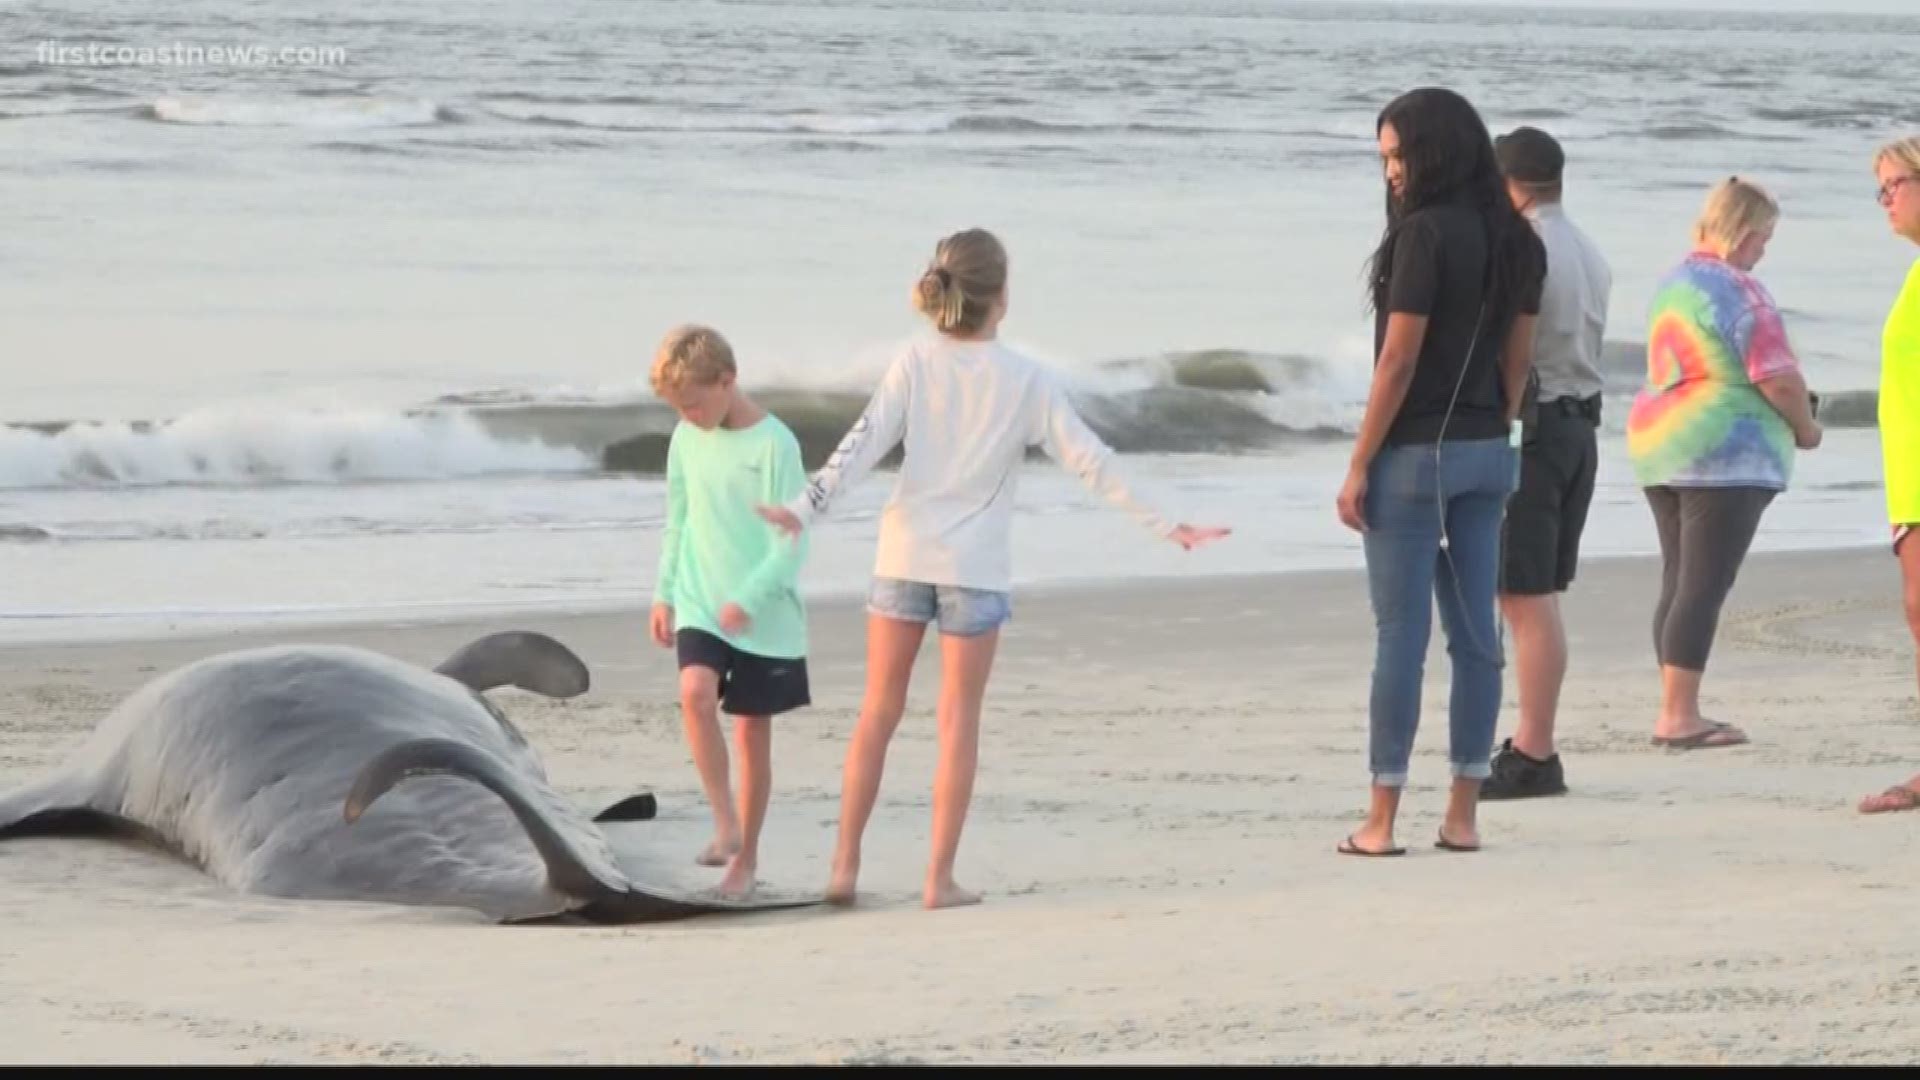 The Georgia Department of Natural Resources (DNR) says that at least three whales have died after at least 47 pilot whales beached themselves at St. Simons Island Tuesday evening.